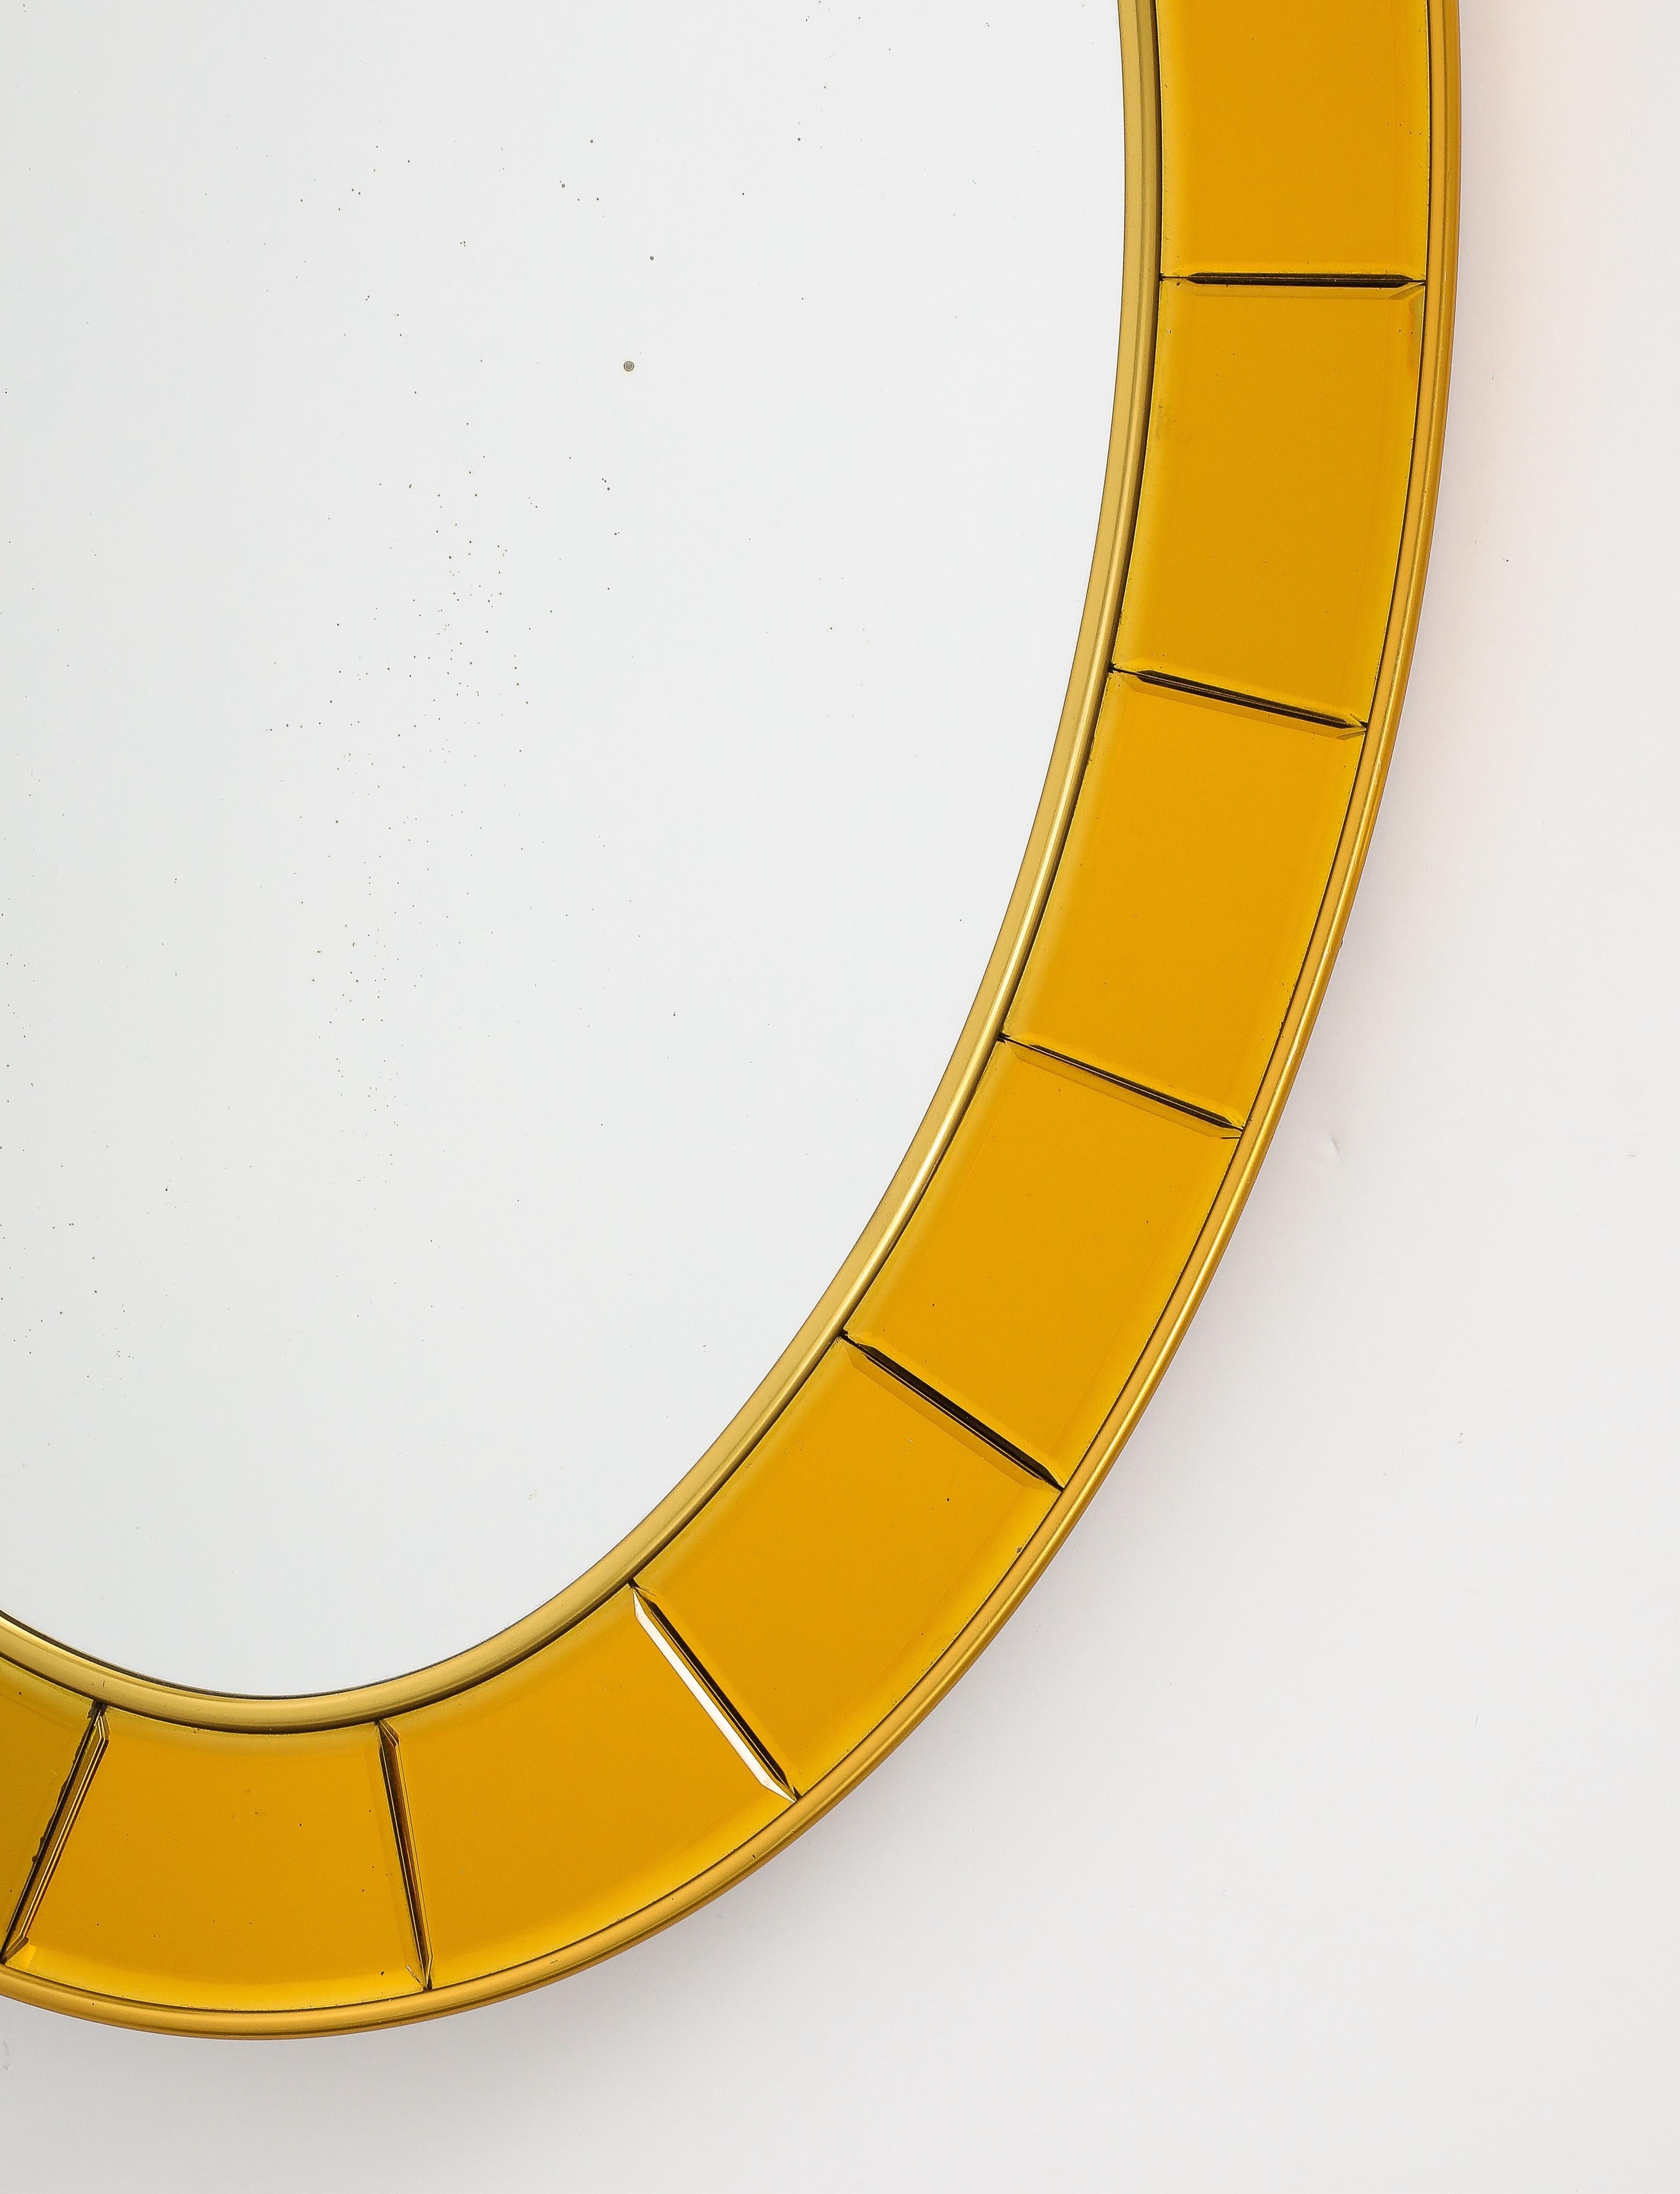 Cristal Art Oval Gold Hand-Cut Beveled Glass Mirror Model 2727, 1950s For Sale 2